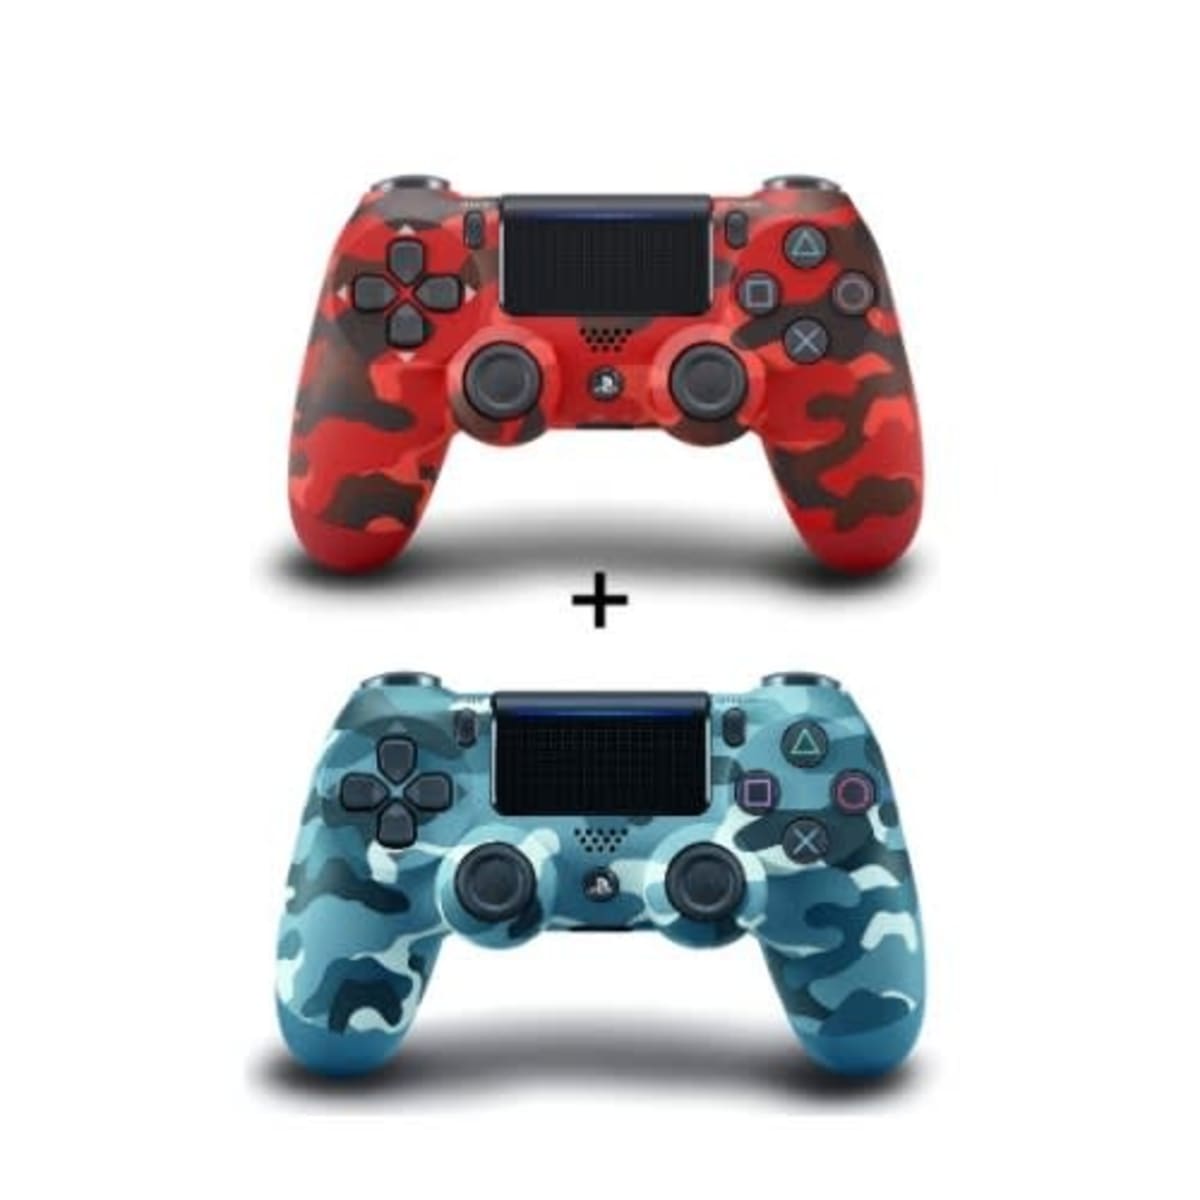 Sony Ps4 Gamepad Controller With Touchpad Lightbar - Red And Blue Camo -  2pieces